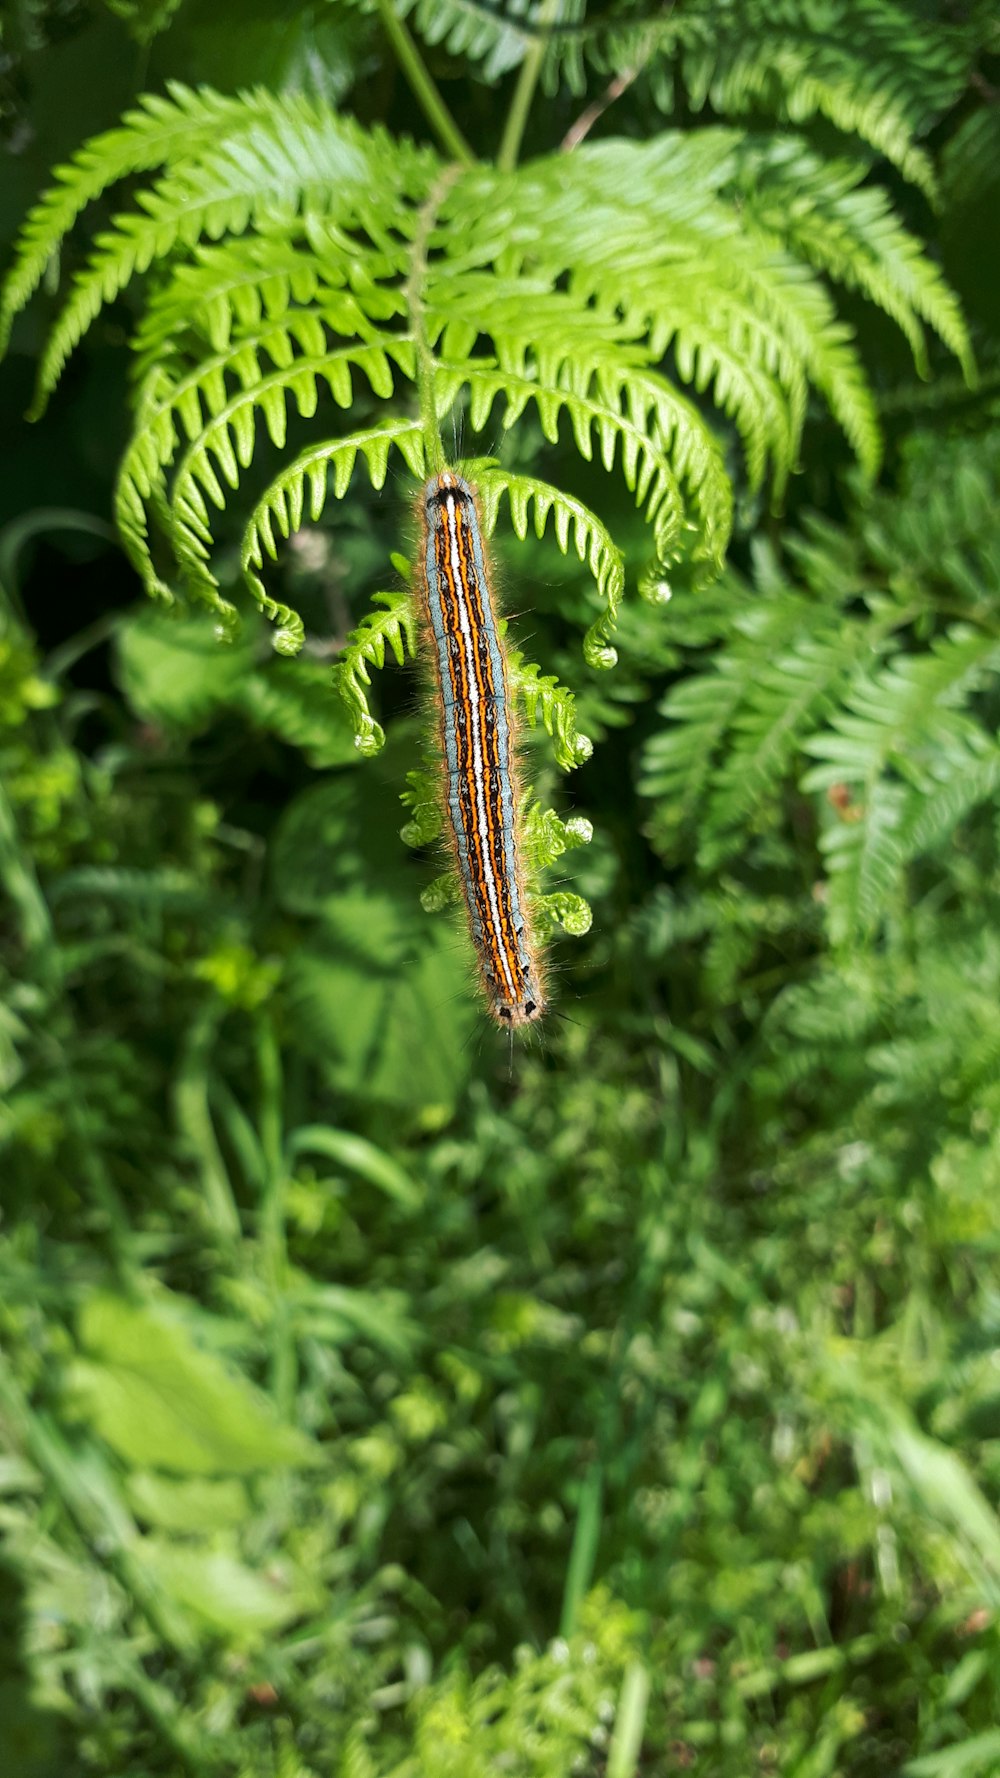 green and brown caterpillar on green fern plant